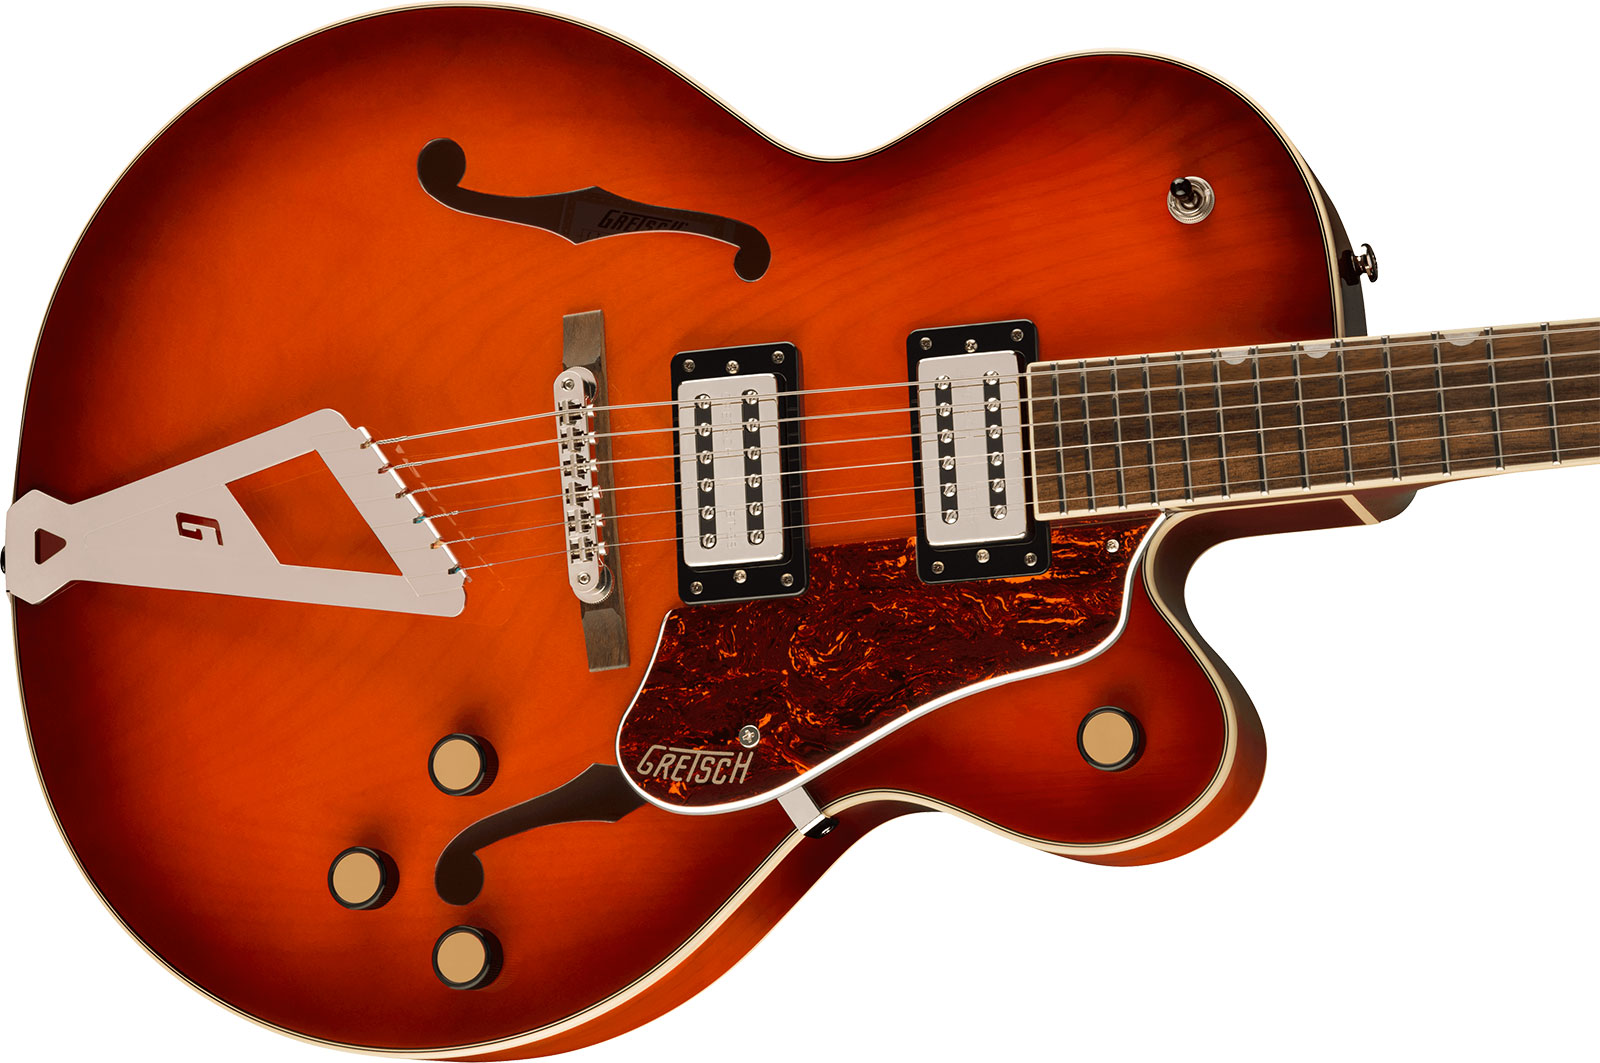 Gretsch G2420 Streamliner Hollow Body With Chromatic Ii 2h Ht Lau - Fireburst - Hollow-body electric guitar - Variation 2